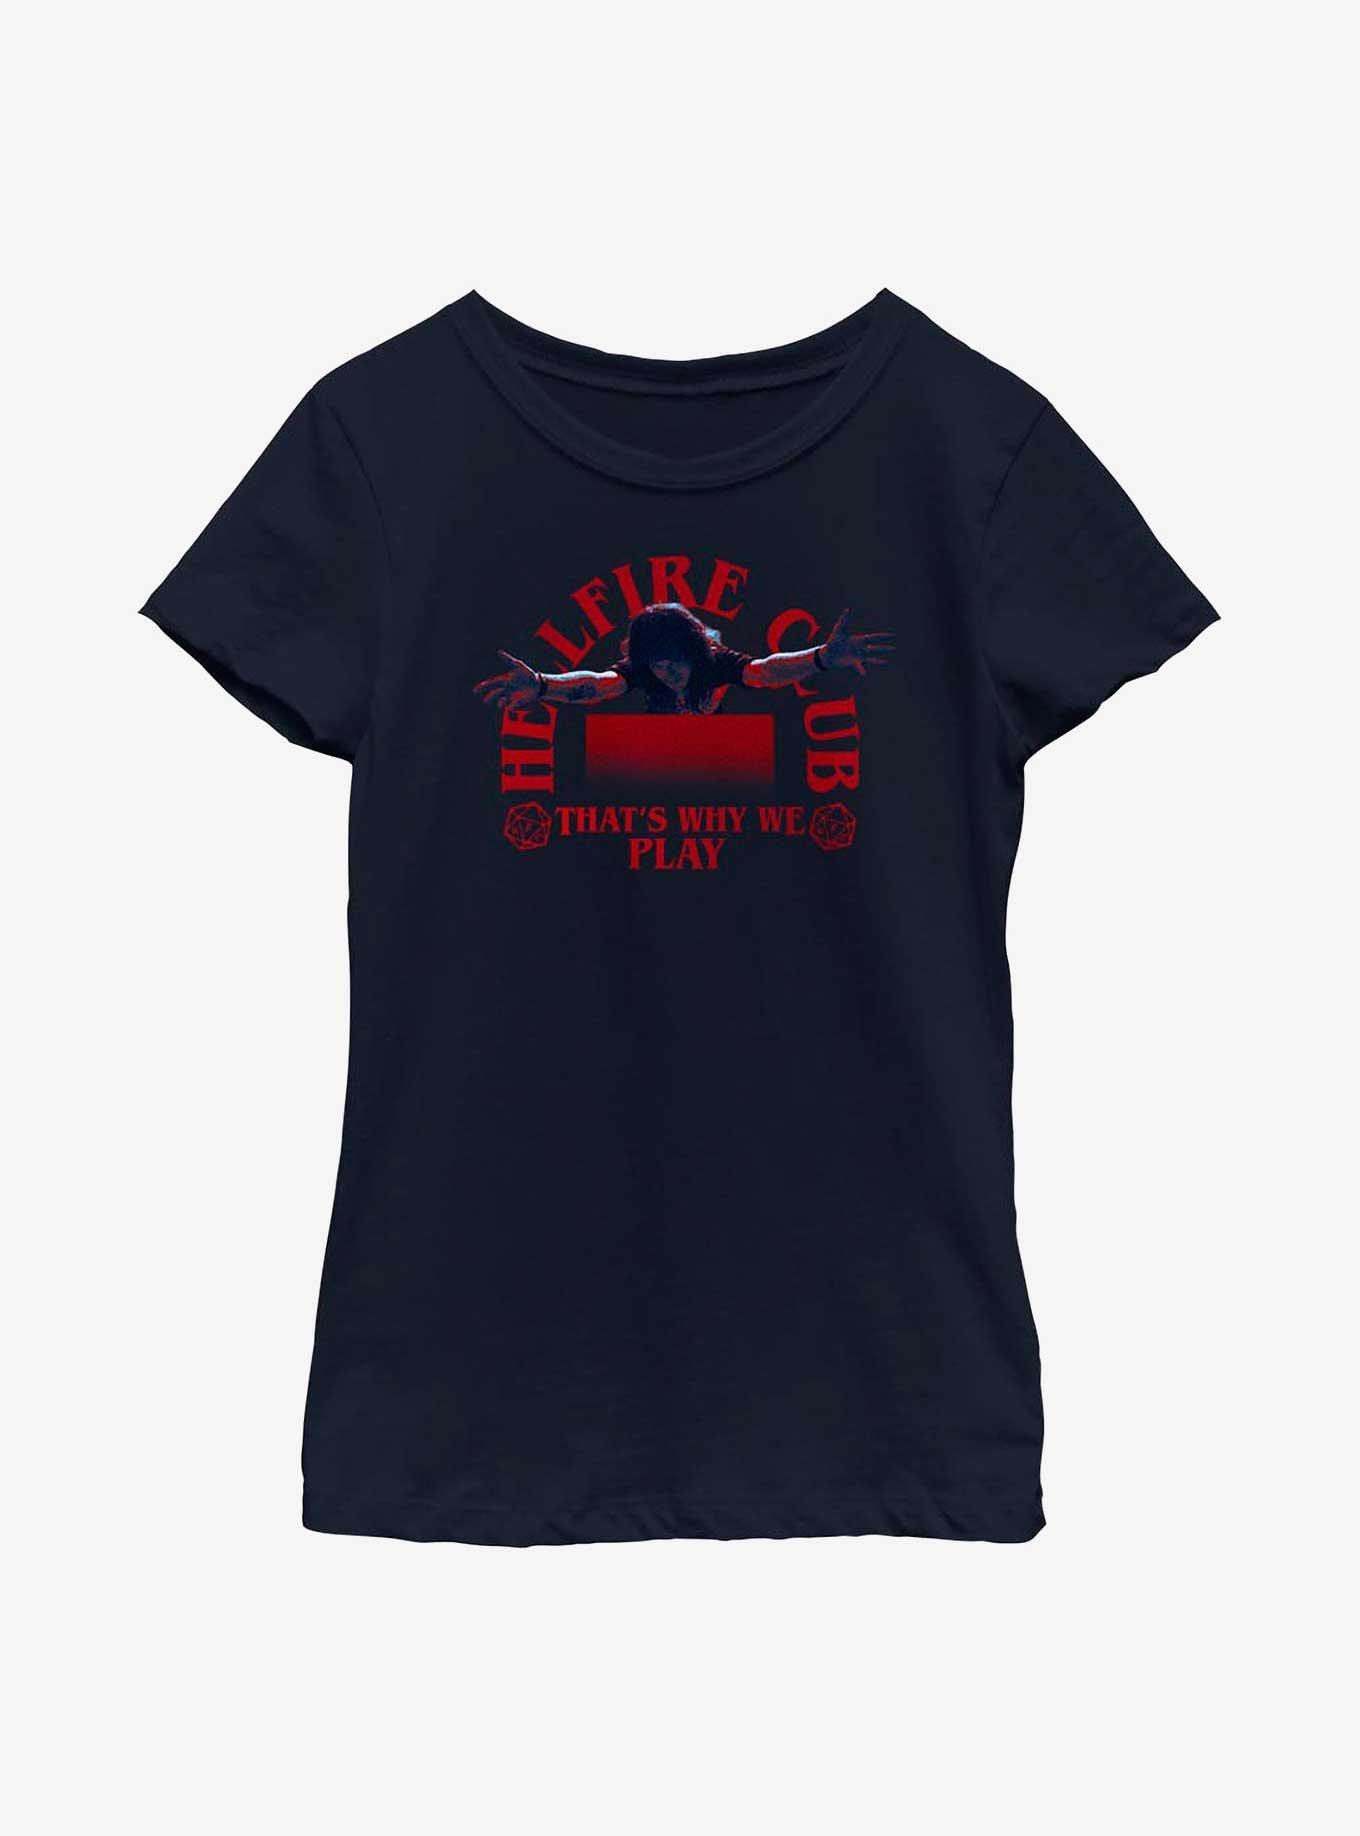 Stranger Things Hellfire Club That's Why We Play Youth Girls T-Shirt, NAVY, hi-res